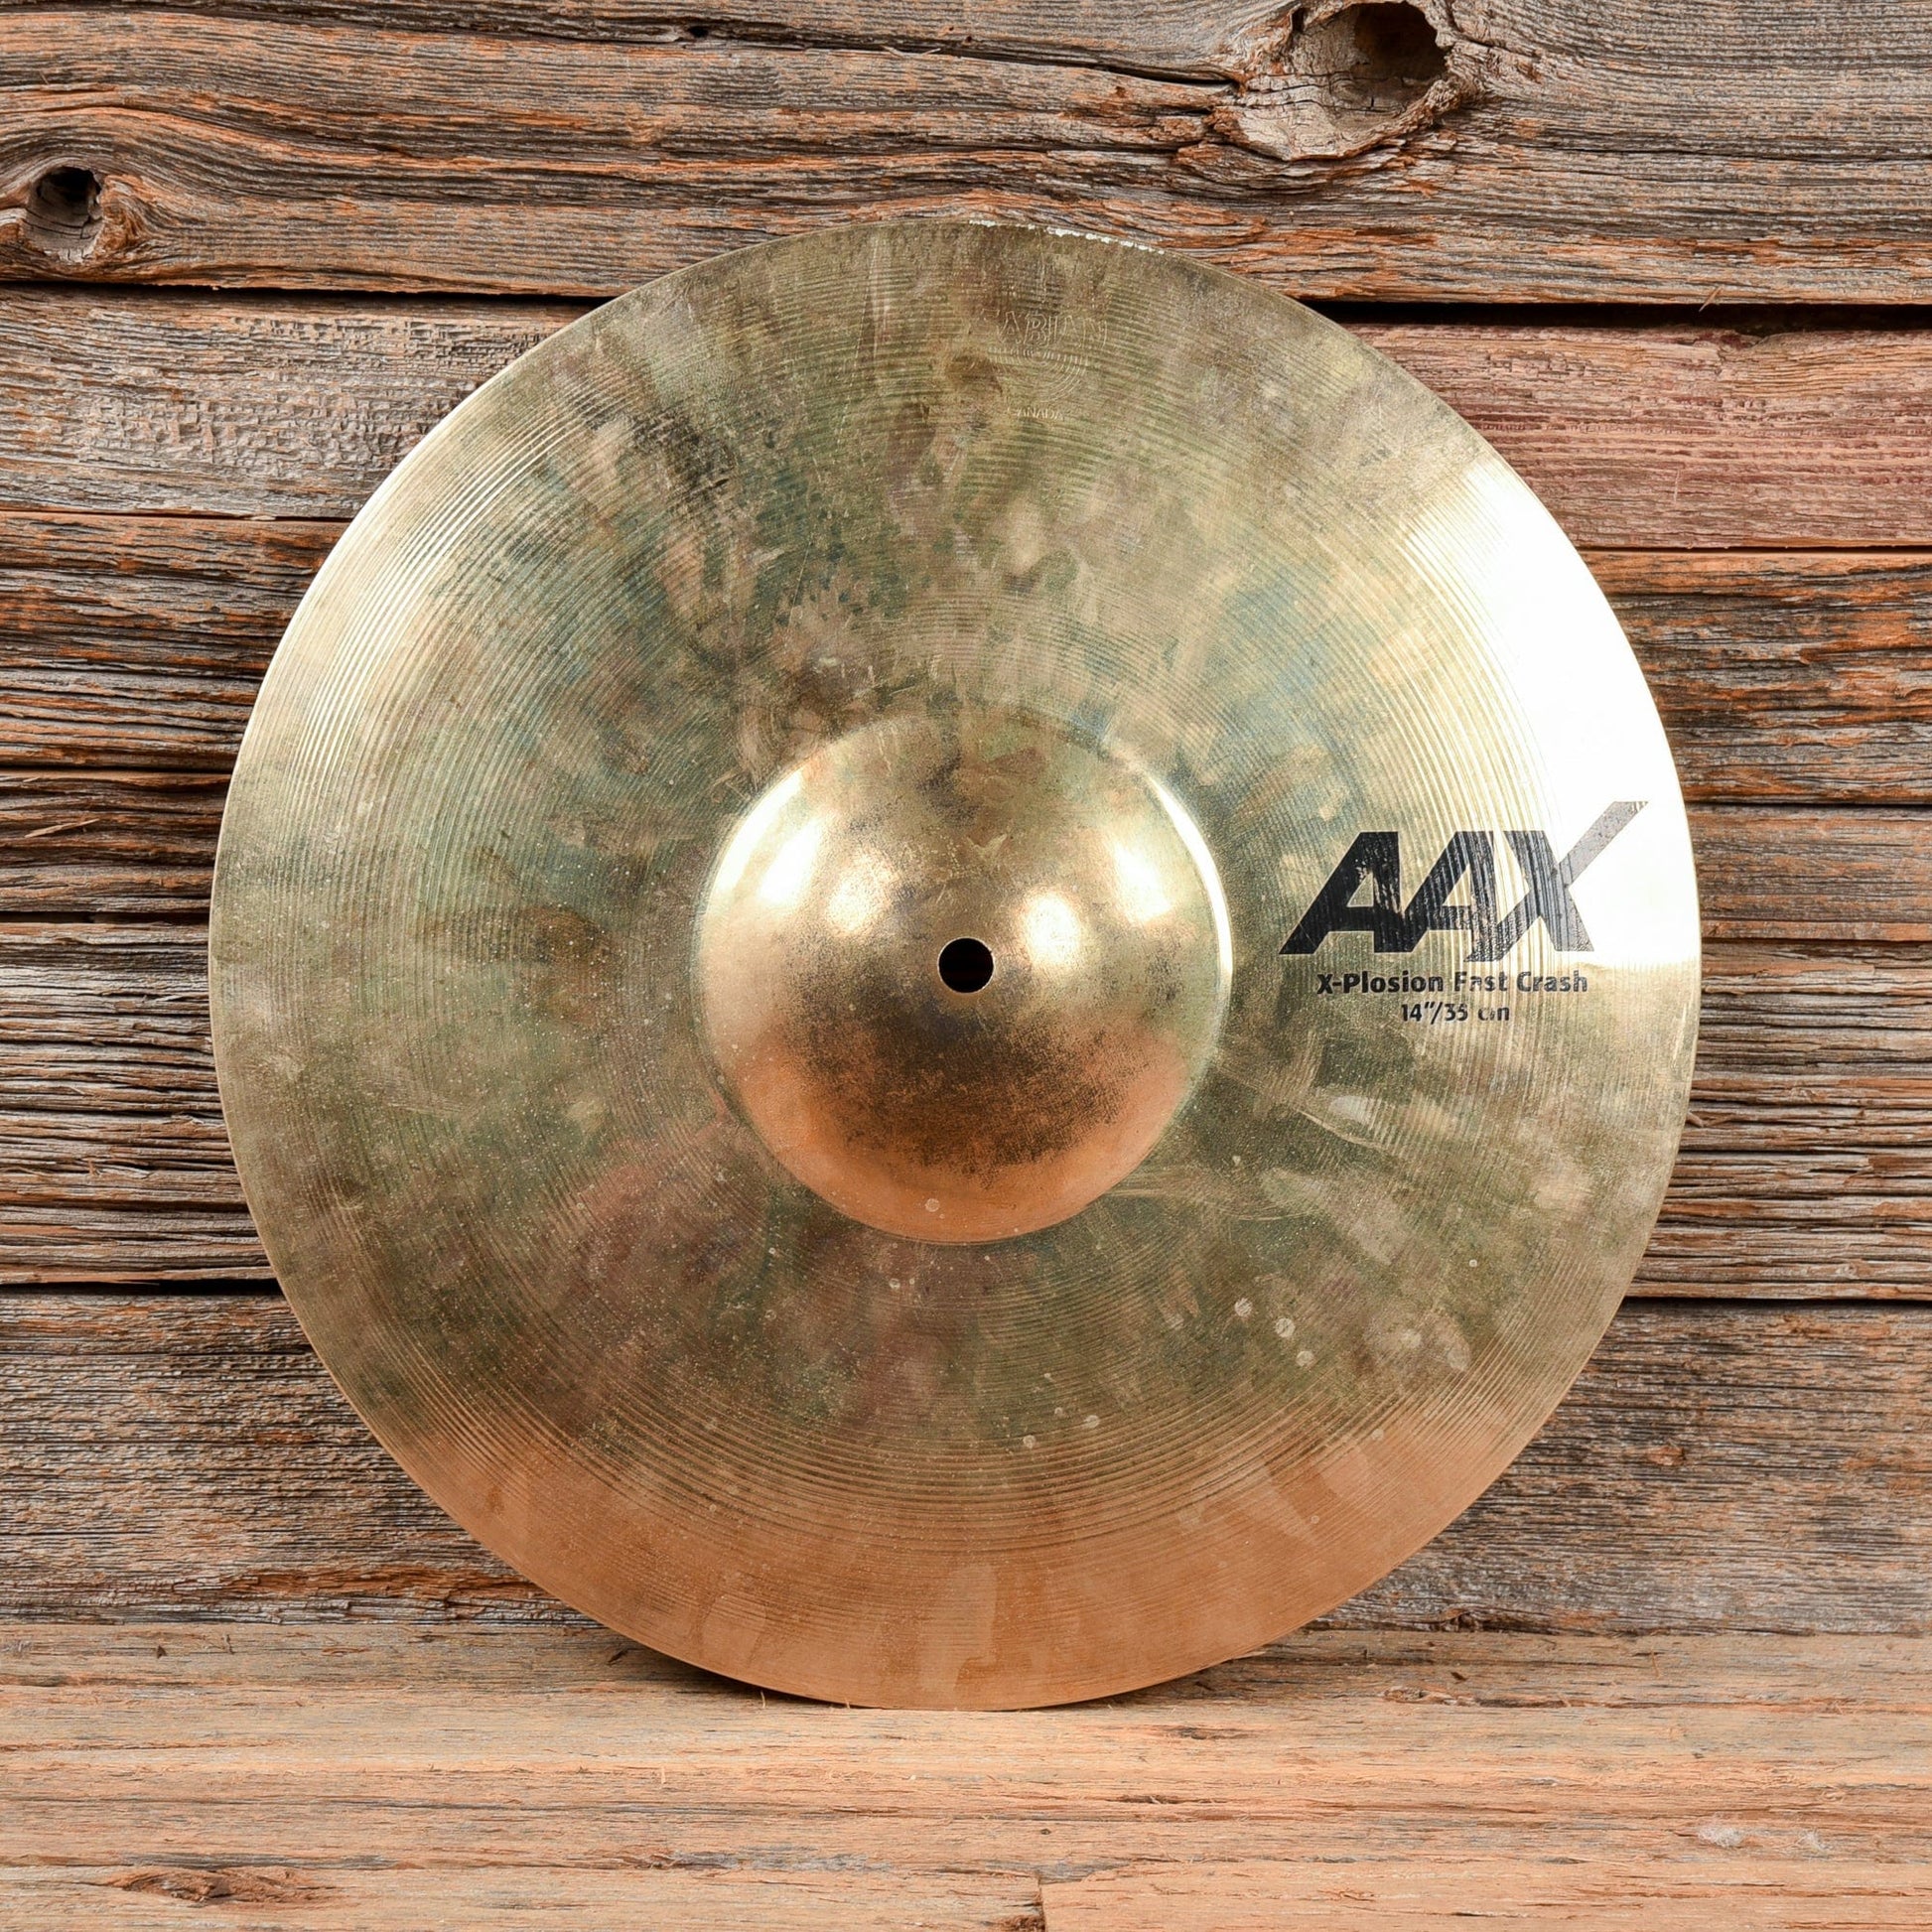 Sabian 14" AAX x-Plosion Fast Crash Cymbal USED Drums and Percussion